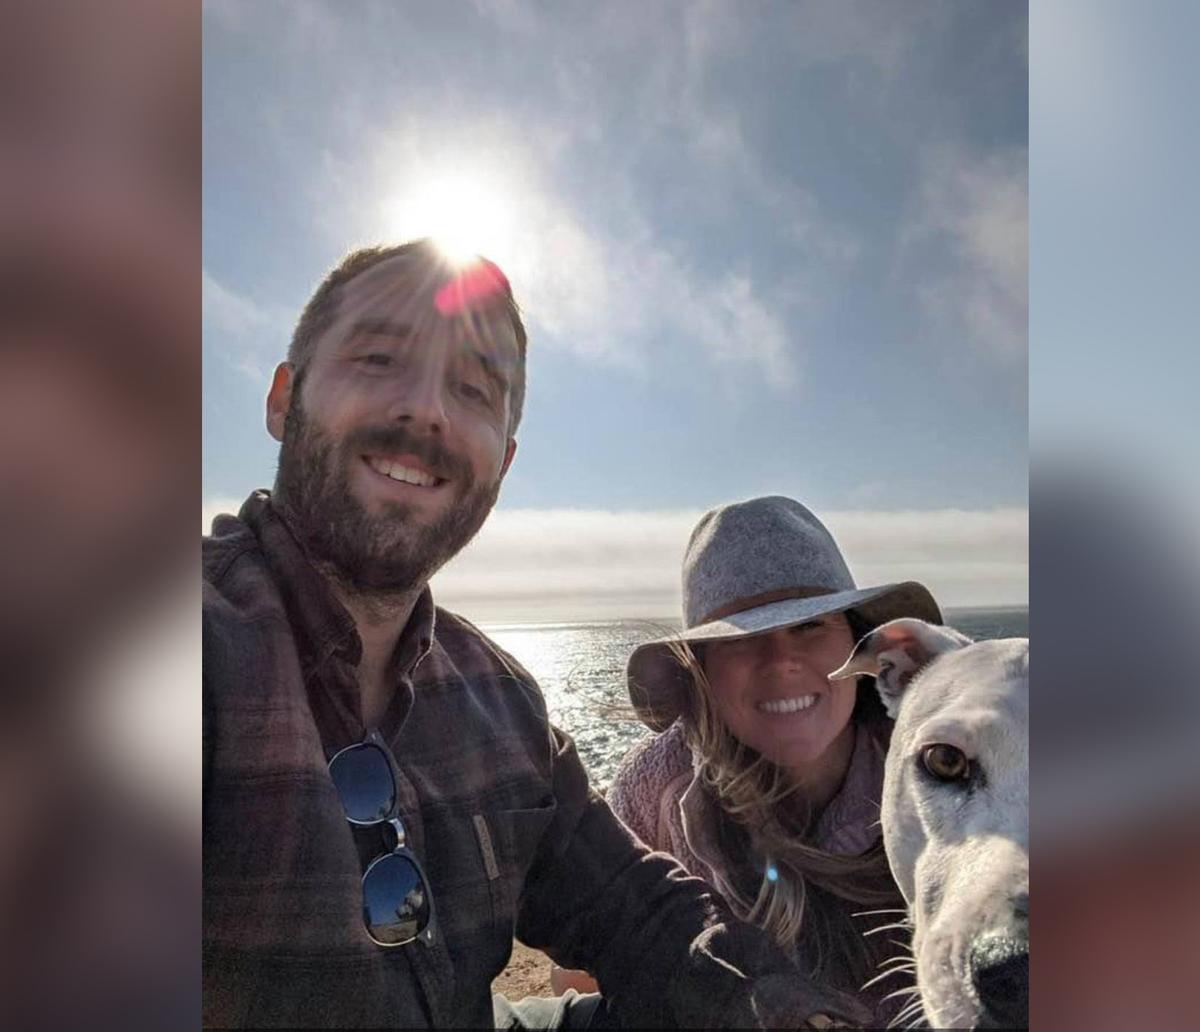 Stefanie and Duane Lindsay with their dog, Roo, at Bodega Bay, just hours before the car crash. (Courtesy of Stefanie Grows)